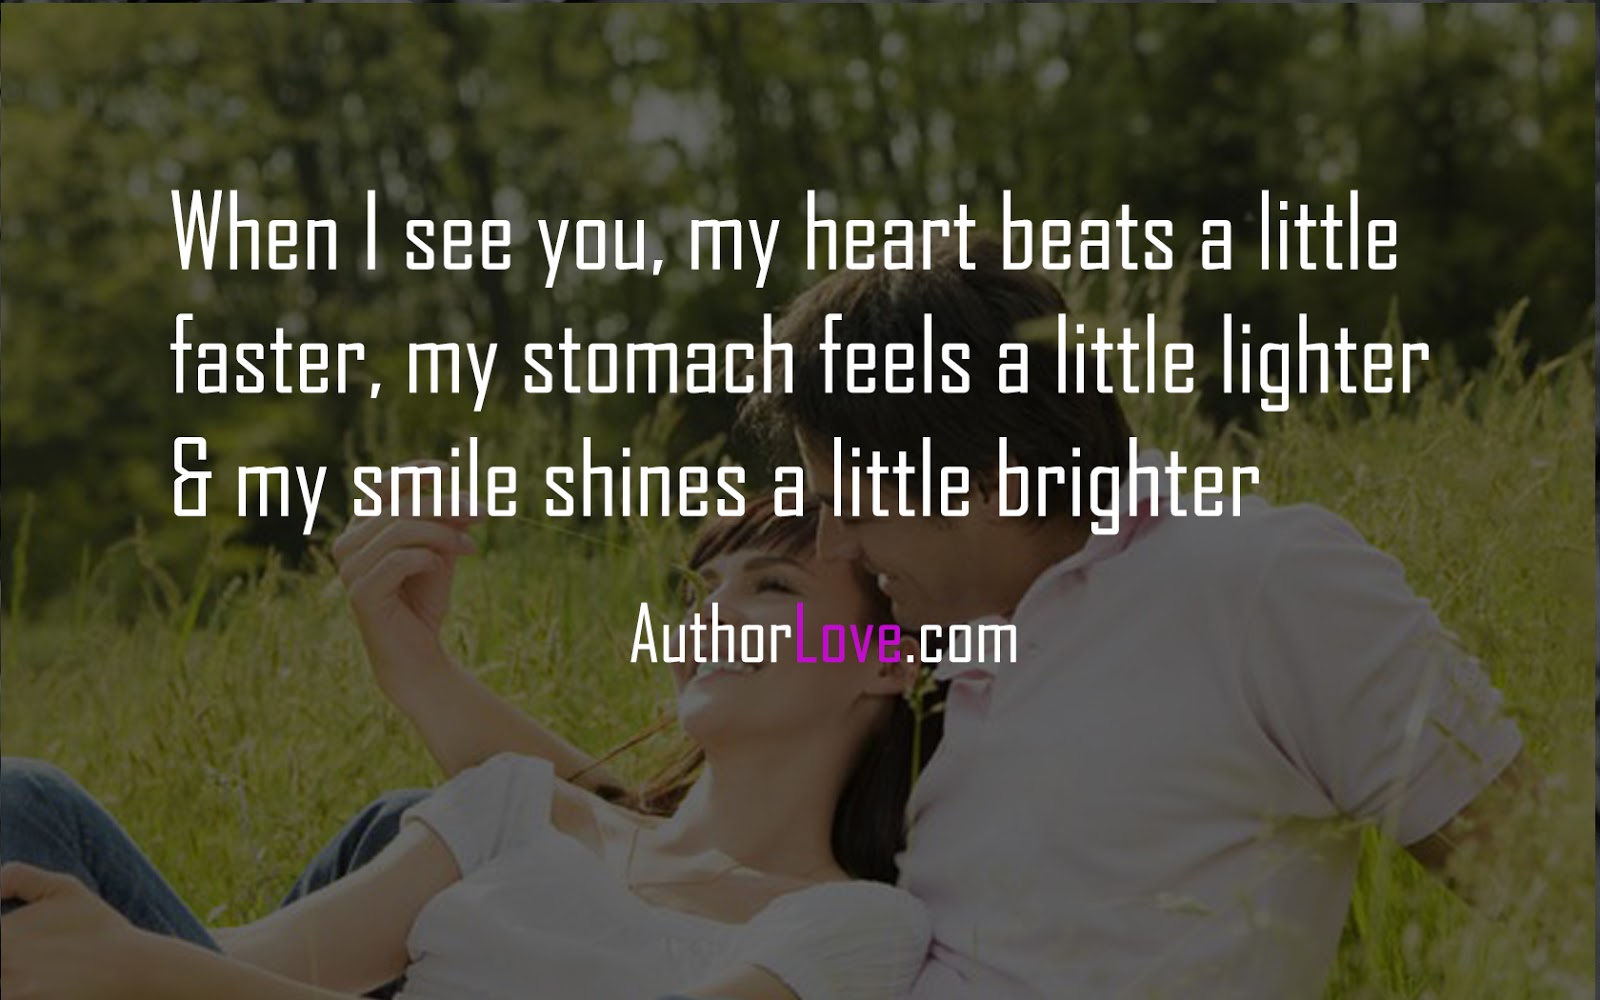 When I see you my heart beats a little faster my stomach feels a little lighter & my smile shines a little brighter